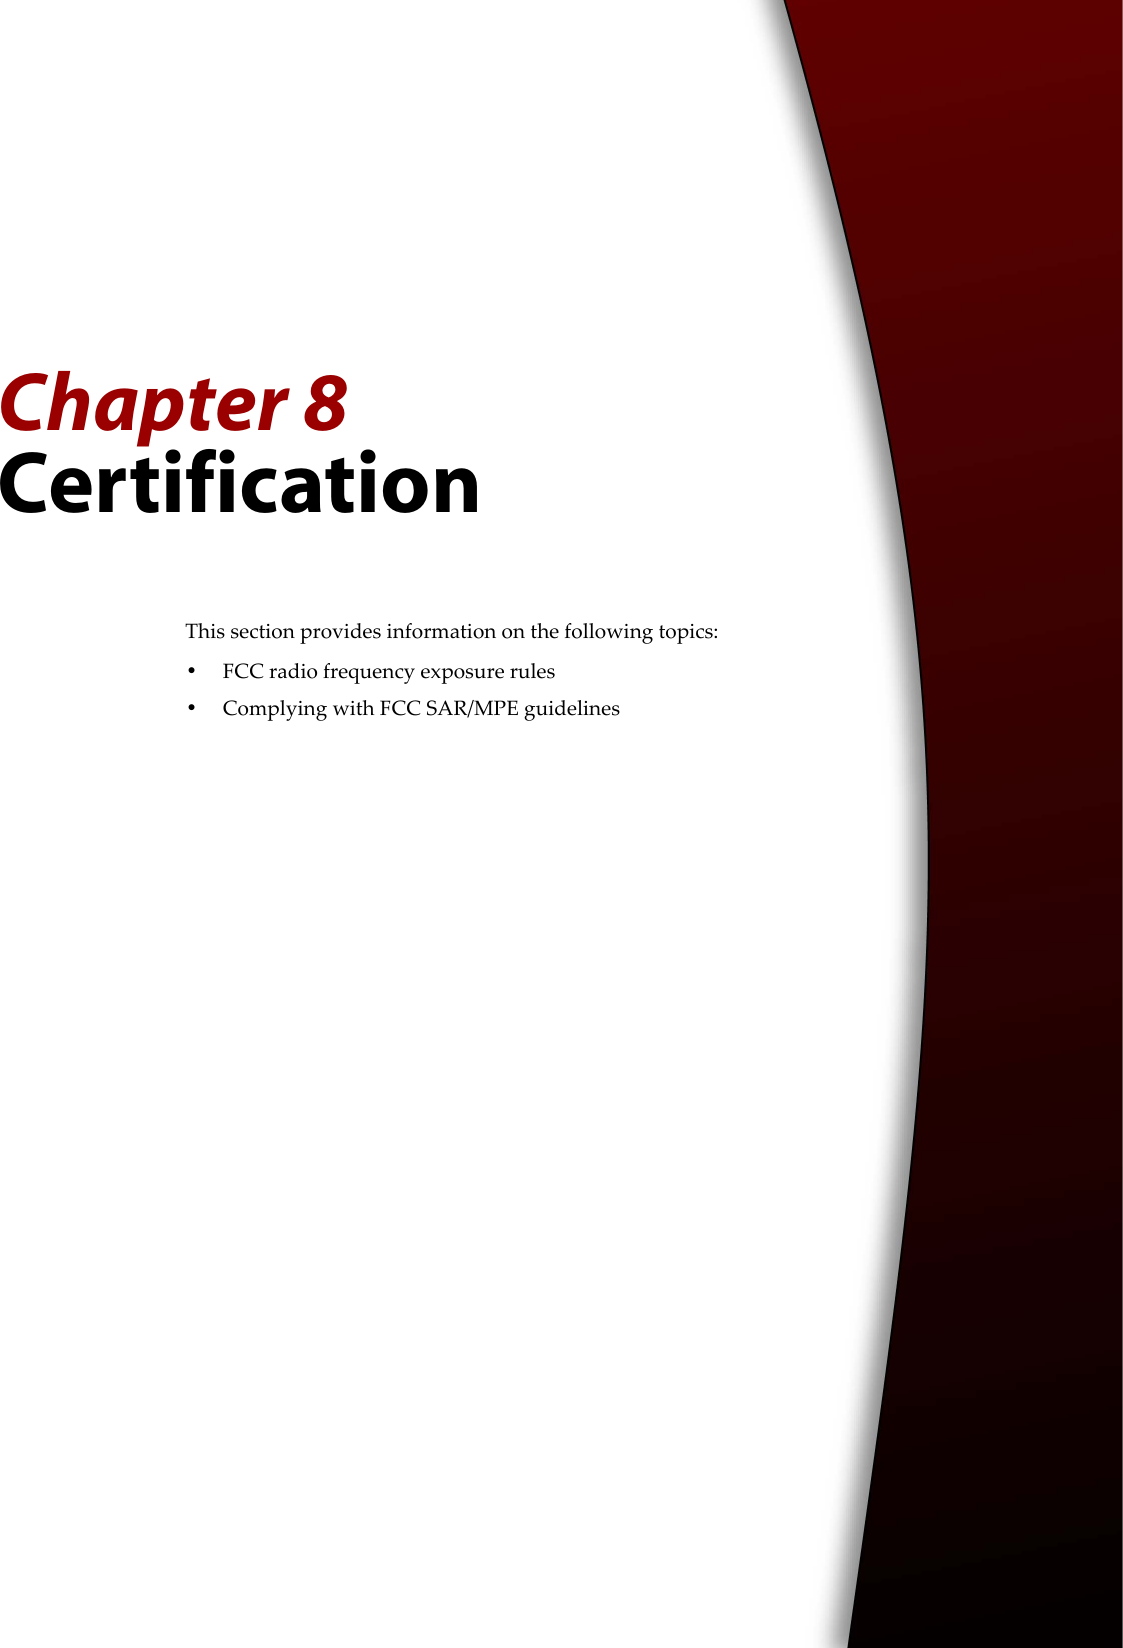 Chapter 8CertificationThis section provides information on the following topics:•FCC radio frequency exposure rules•Complying with FCC SAR/MPE guidelines